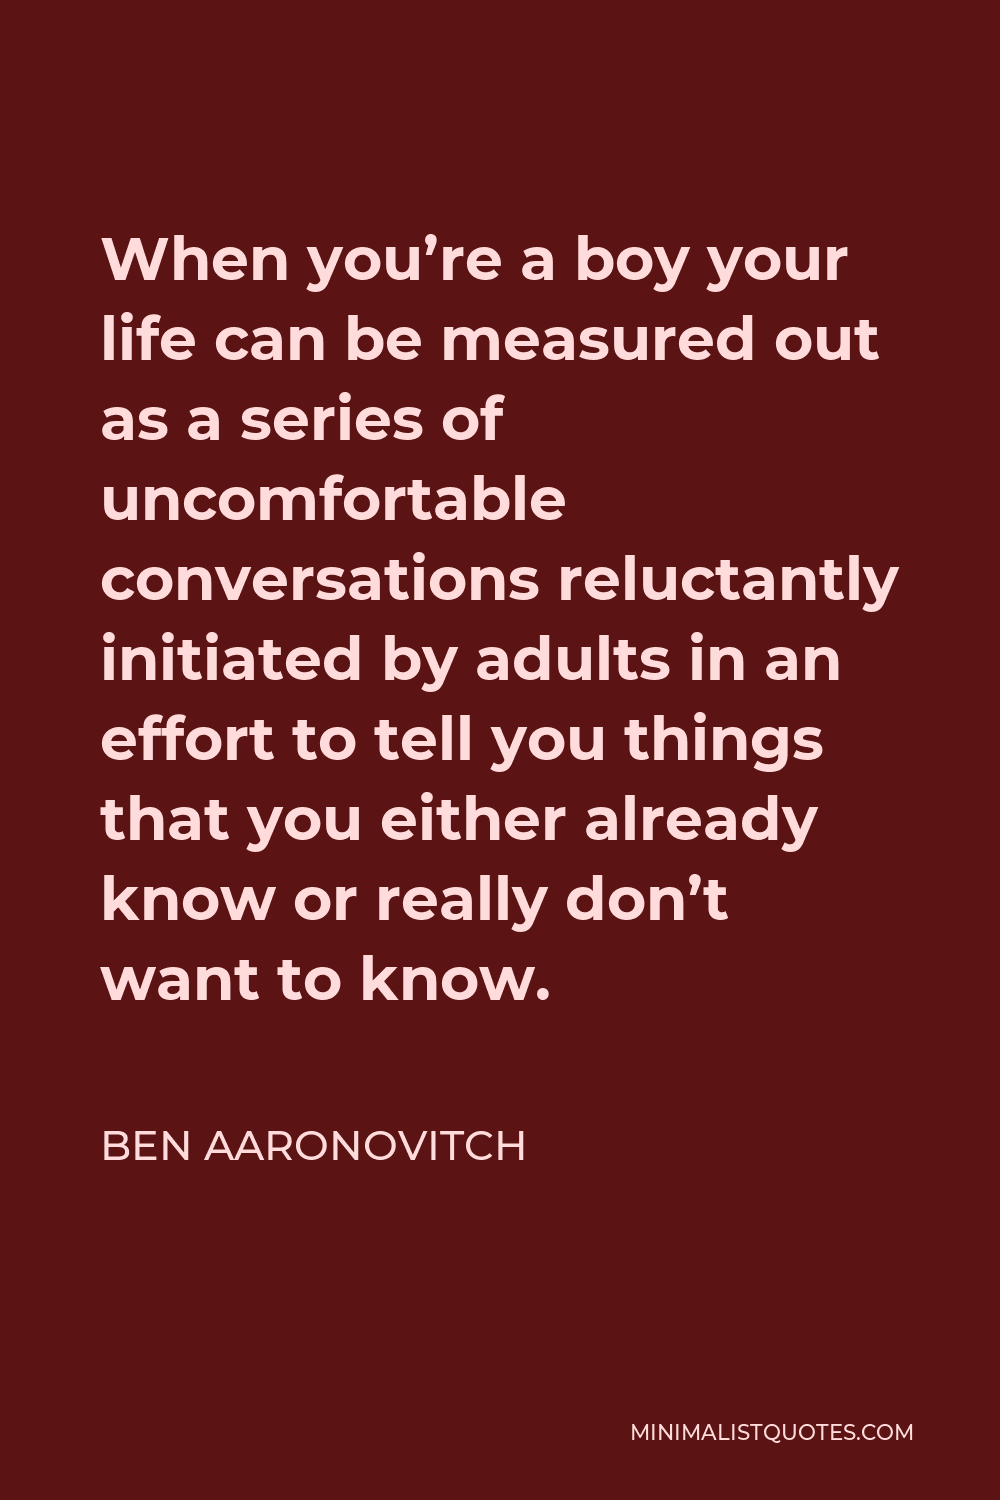 Ben Aaronovitch Quote - When you’re a boy your life can be measured out as a series of uncomfortable conversations reluctantly initiated by adults in an effort to tell you things that you either already know or really don’t want to know.